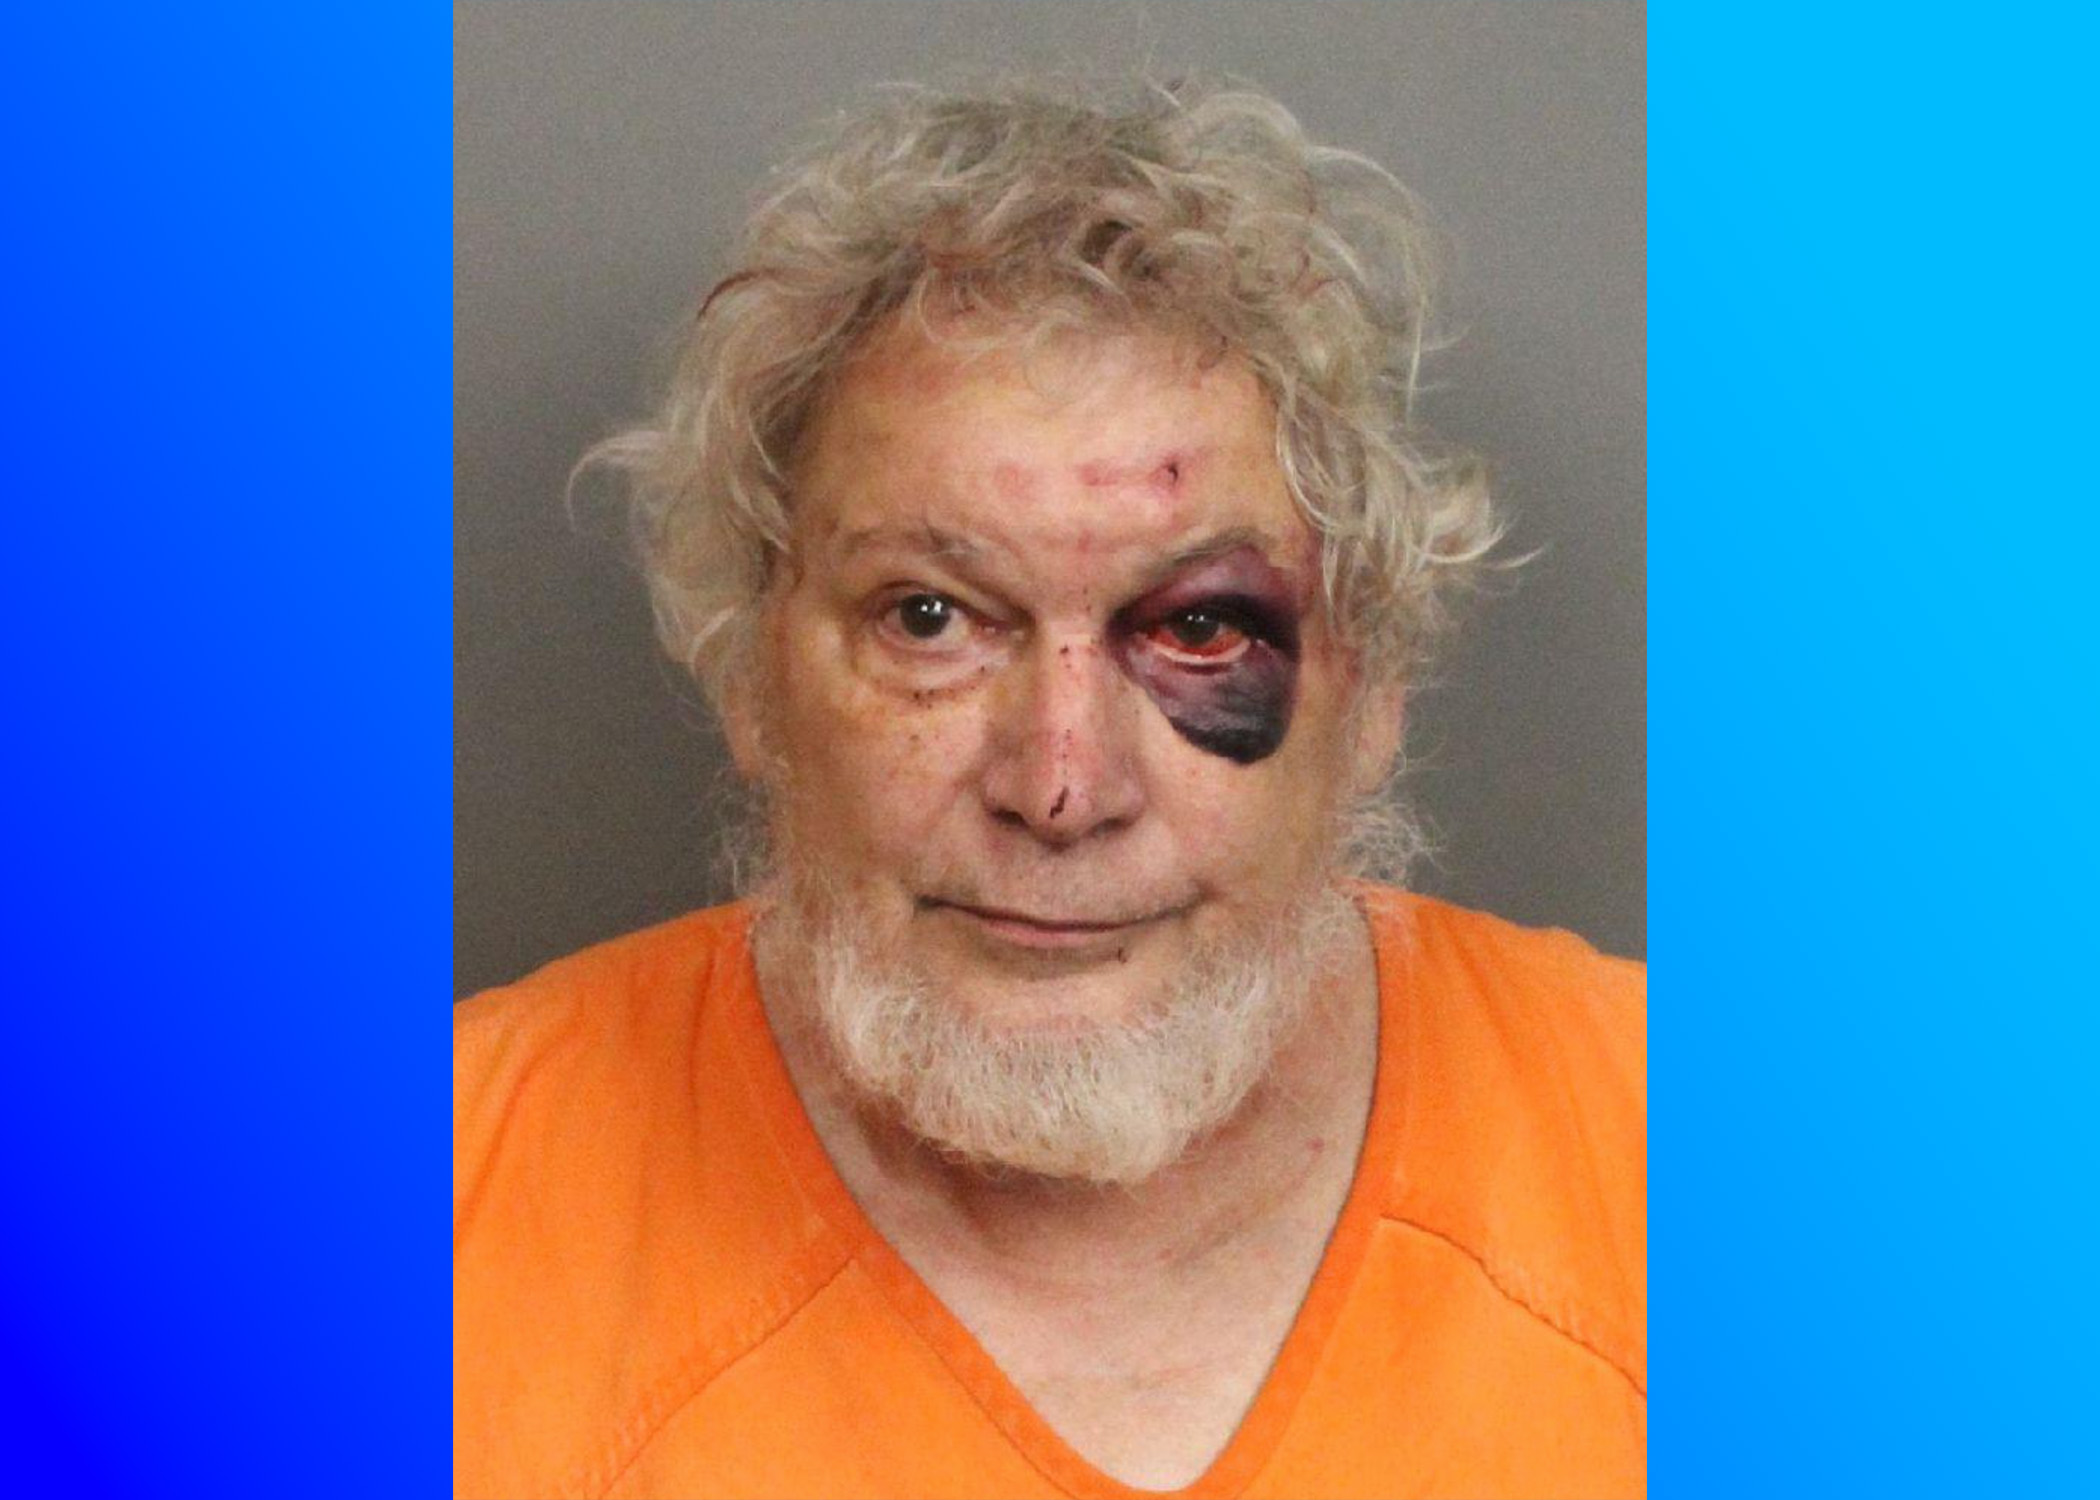 UPDATE: 70-year-old man charged with capital murder in Vestavia Hills church shooting